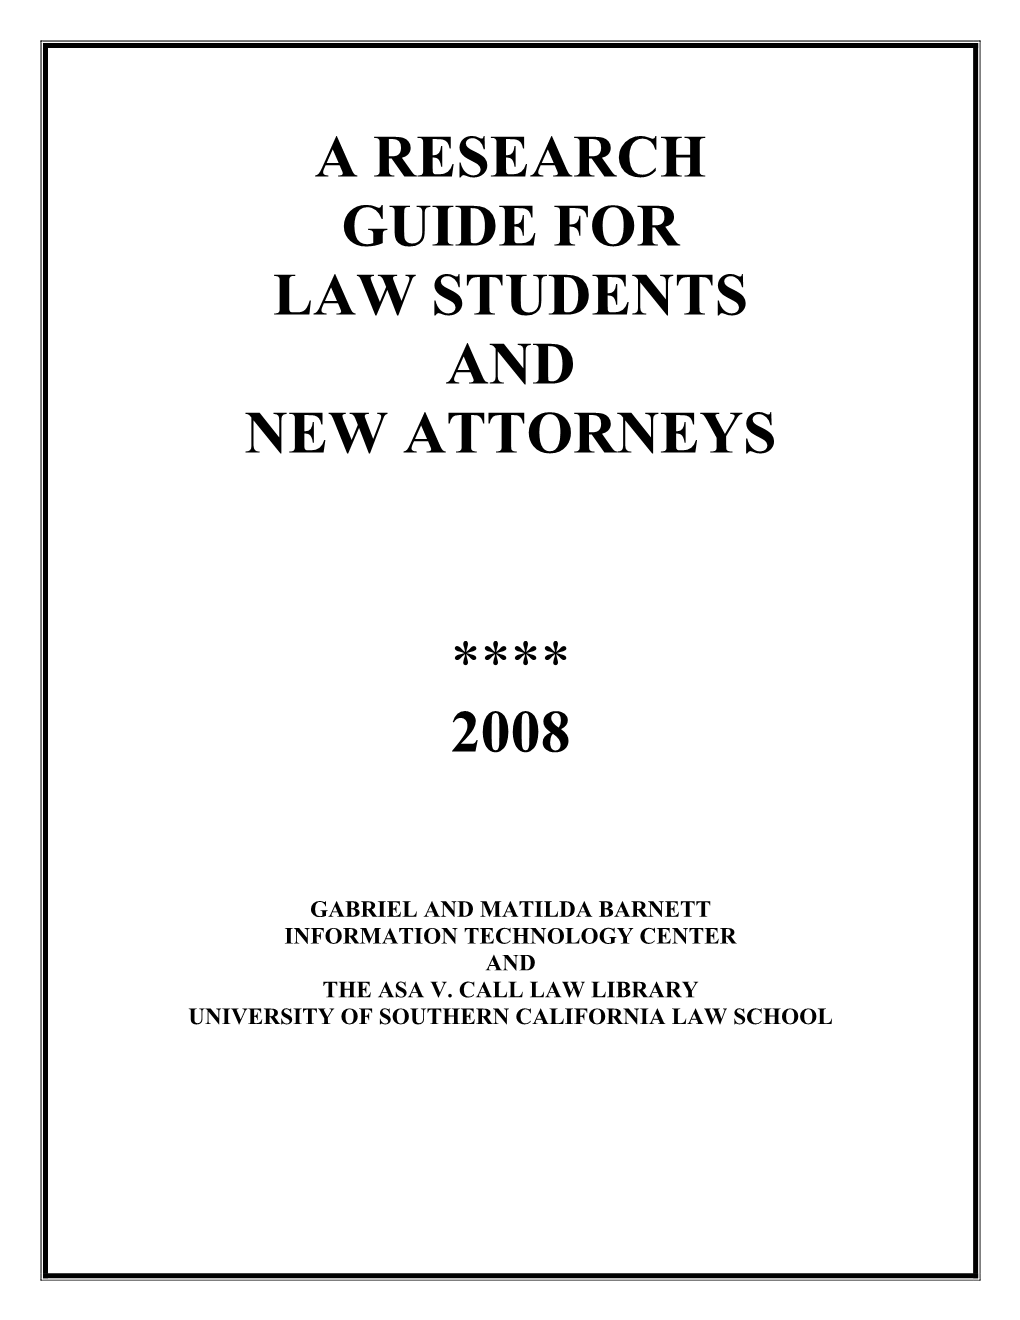 A Research Guide for Law Students and New Attorneys